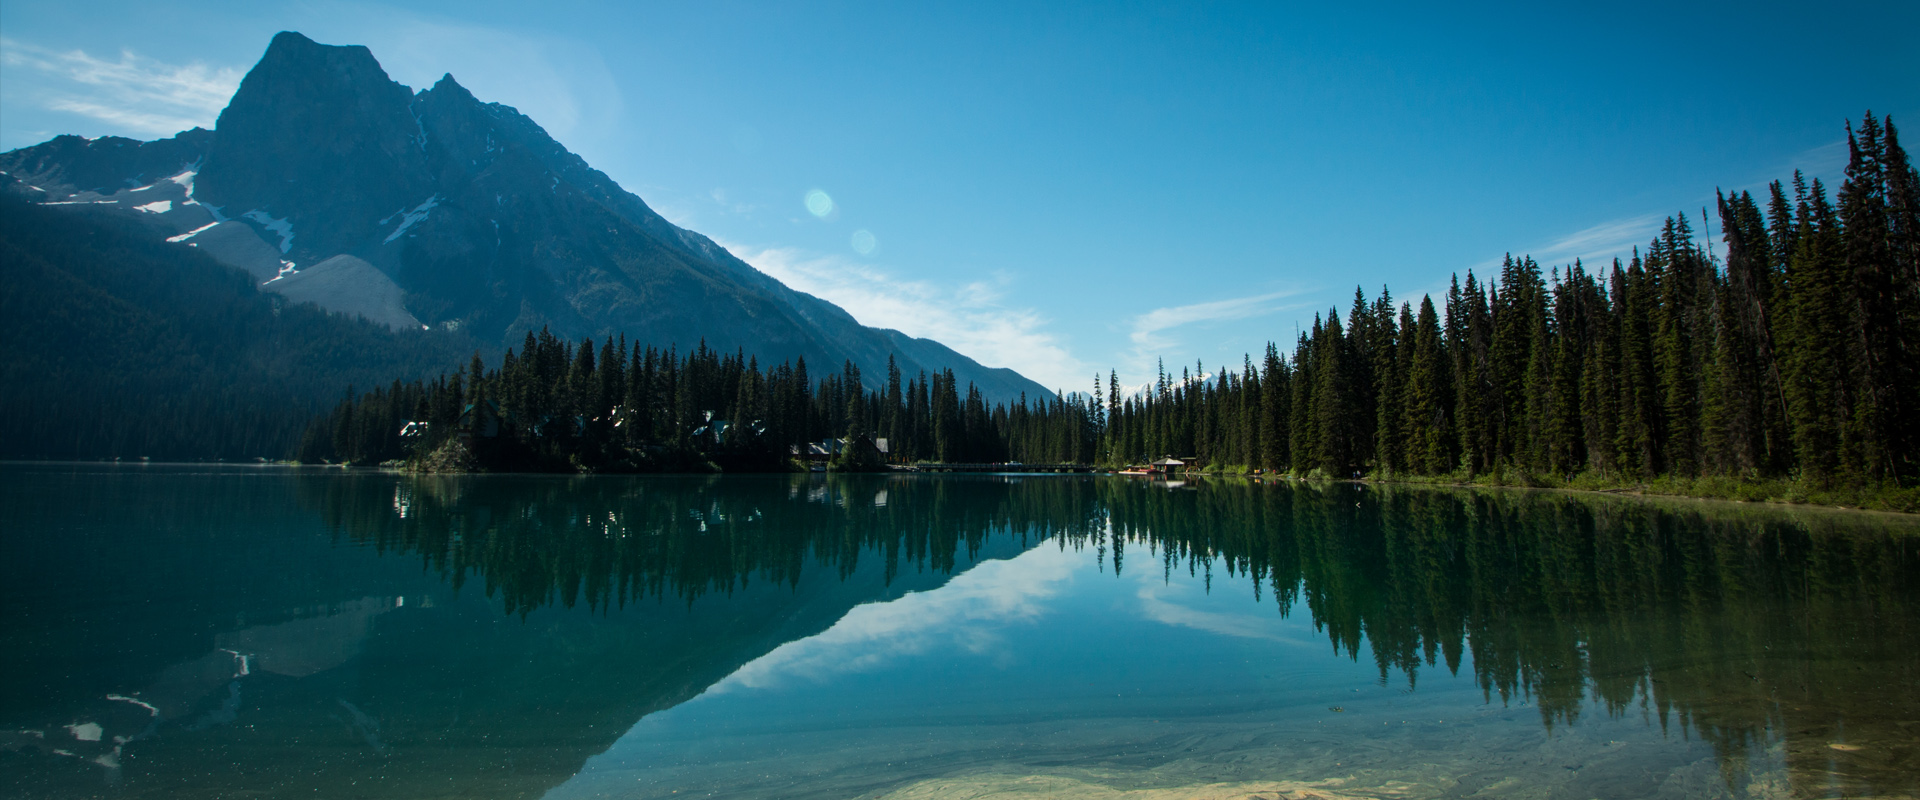 5 Stunning Views in the Canadian Rockies